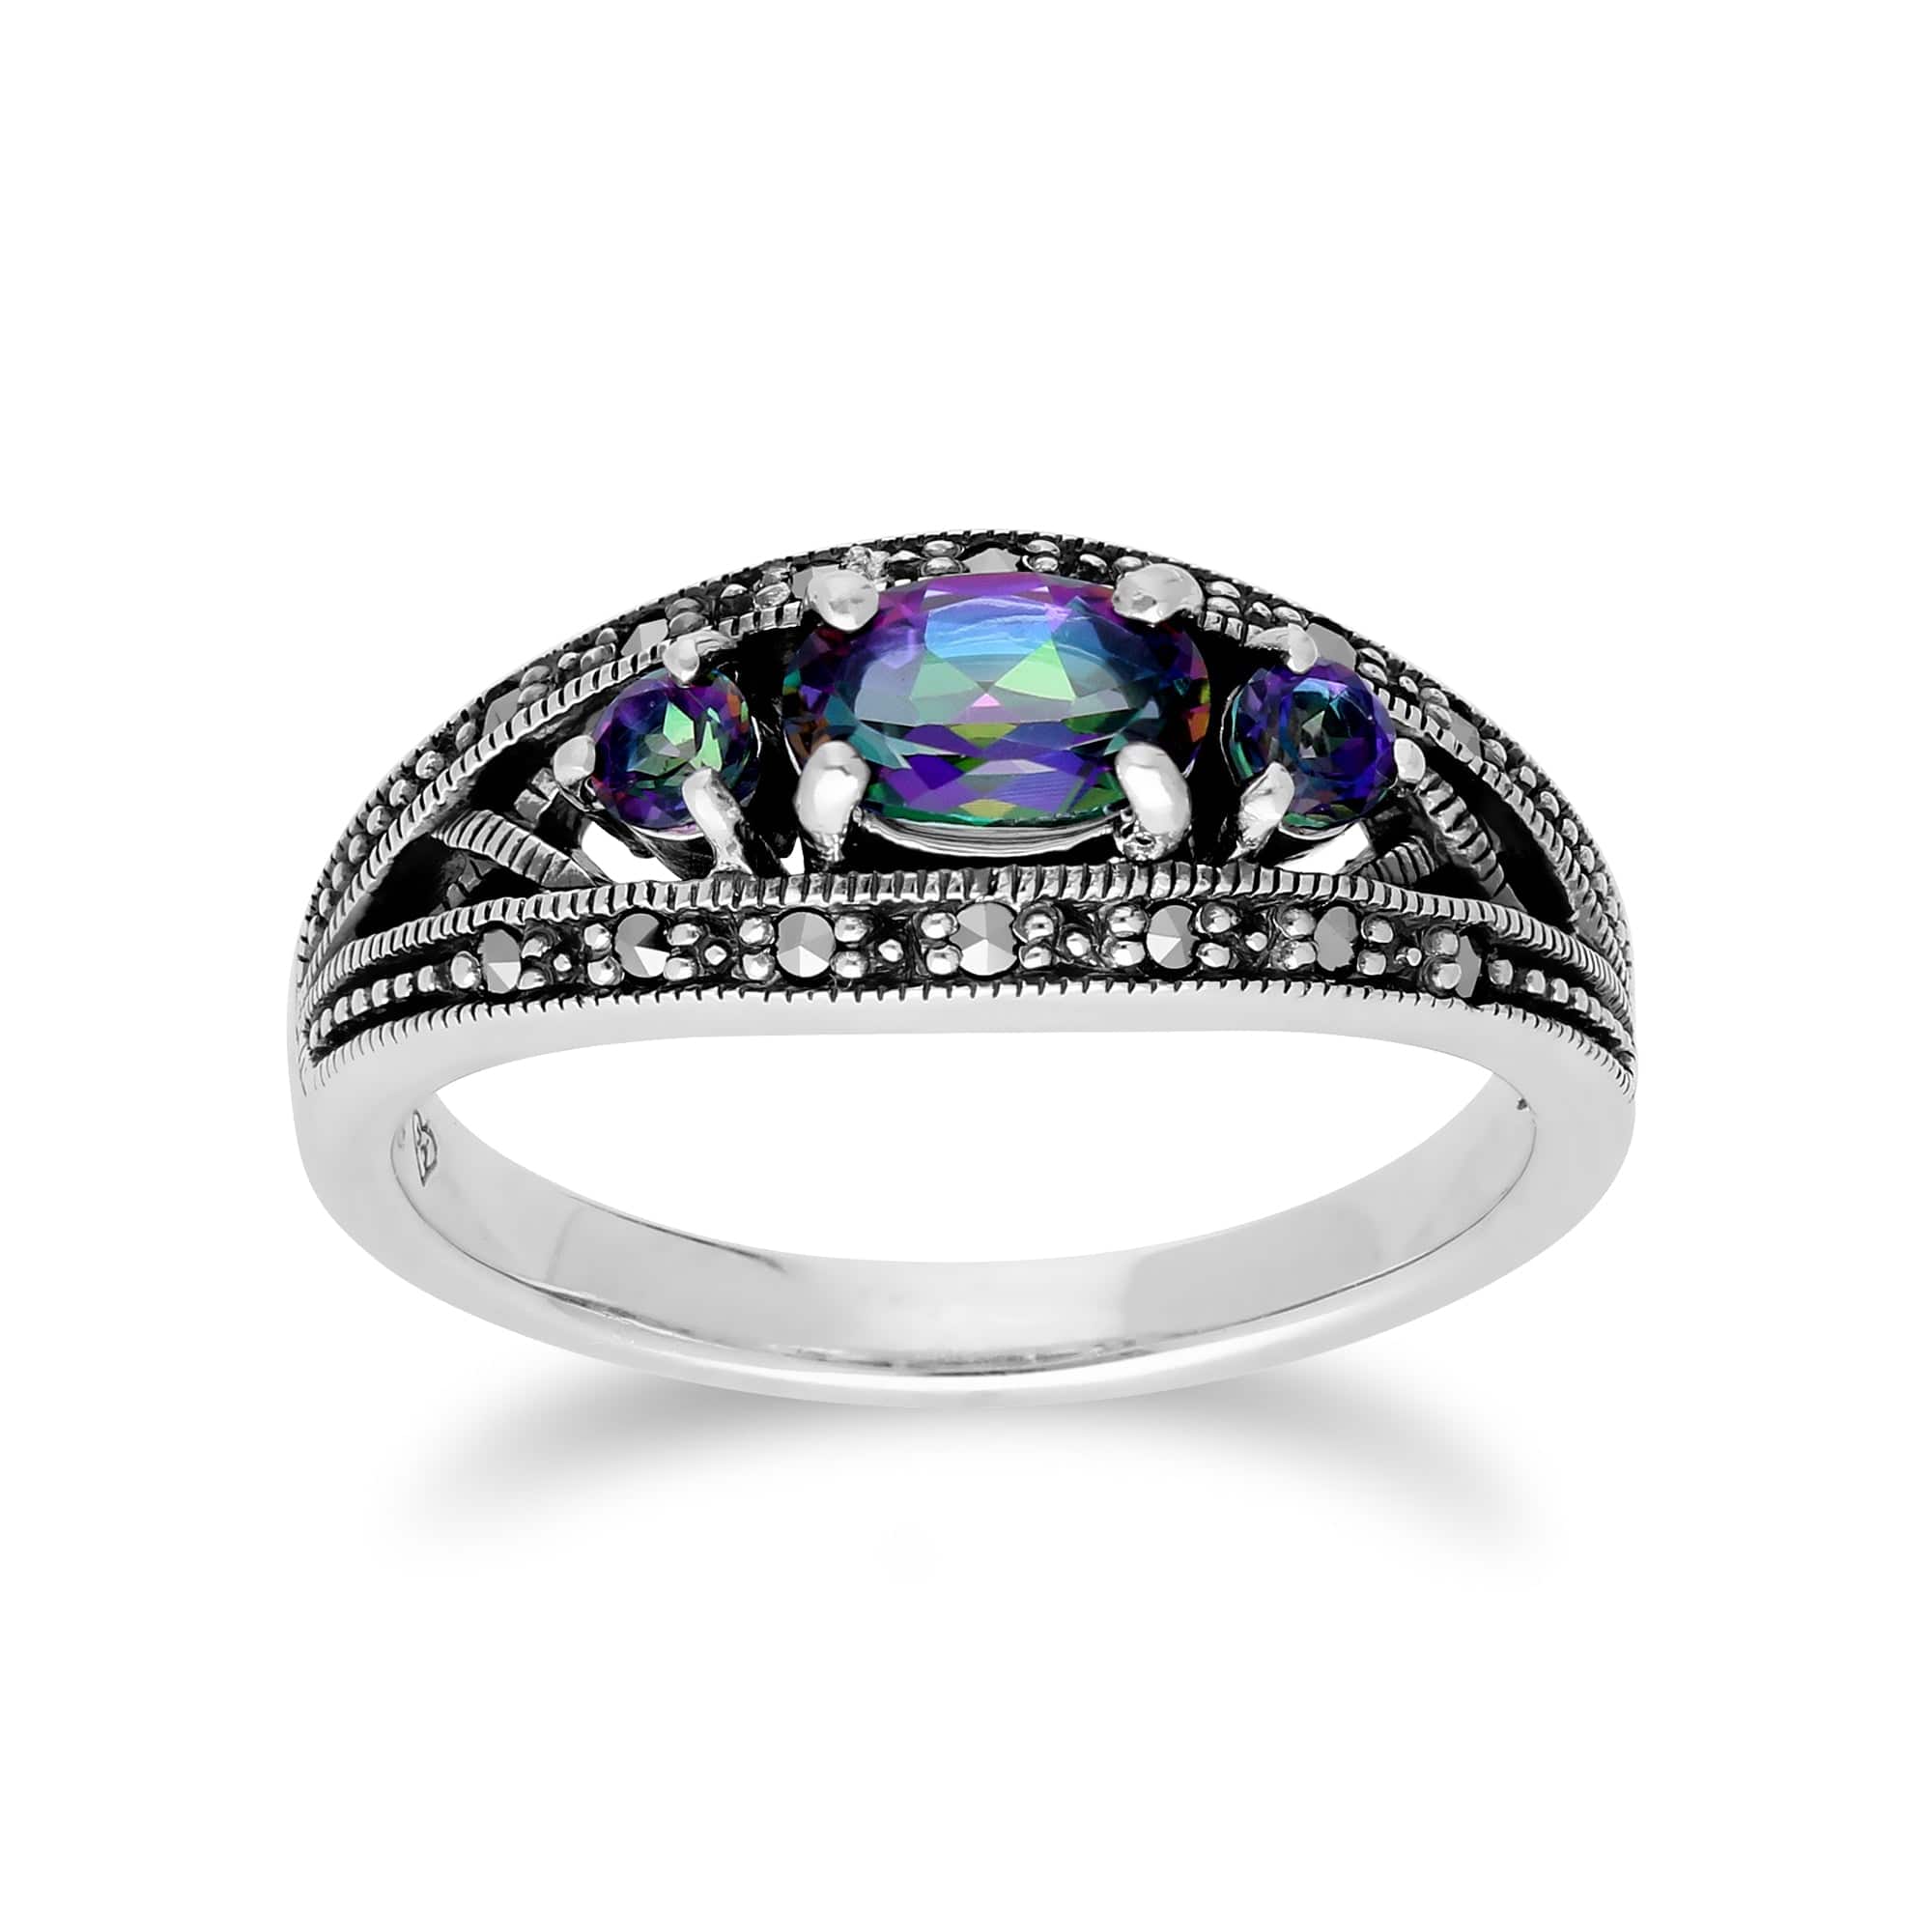 214R424004925 Art Deco Style Oval Mystic Topaz & Marcasite Three Stone Ring in 925 Sterling Silver 1